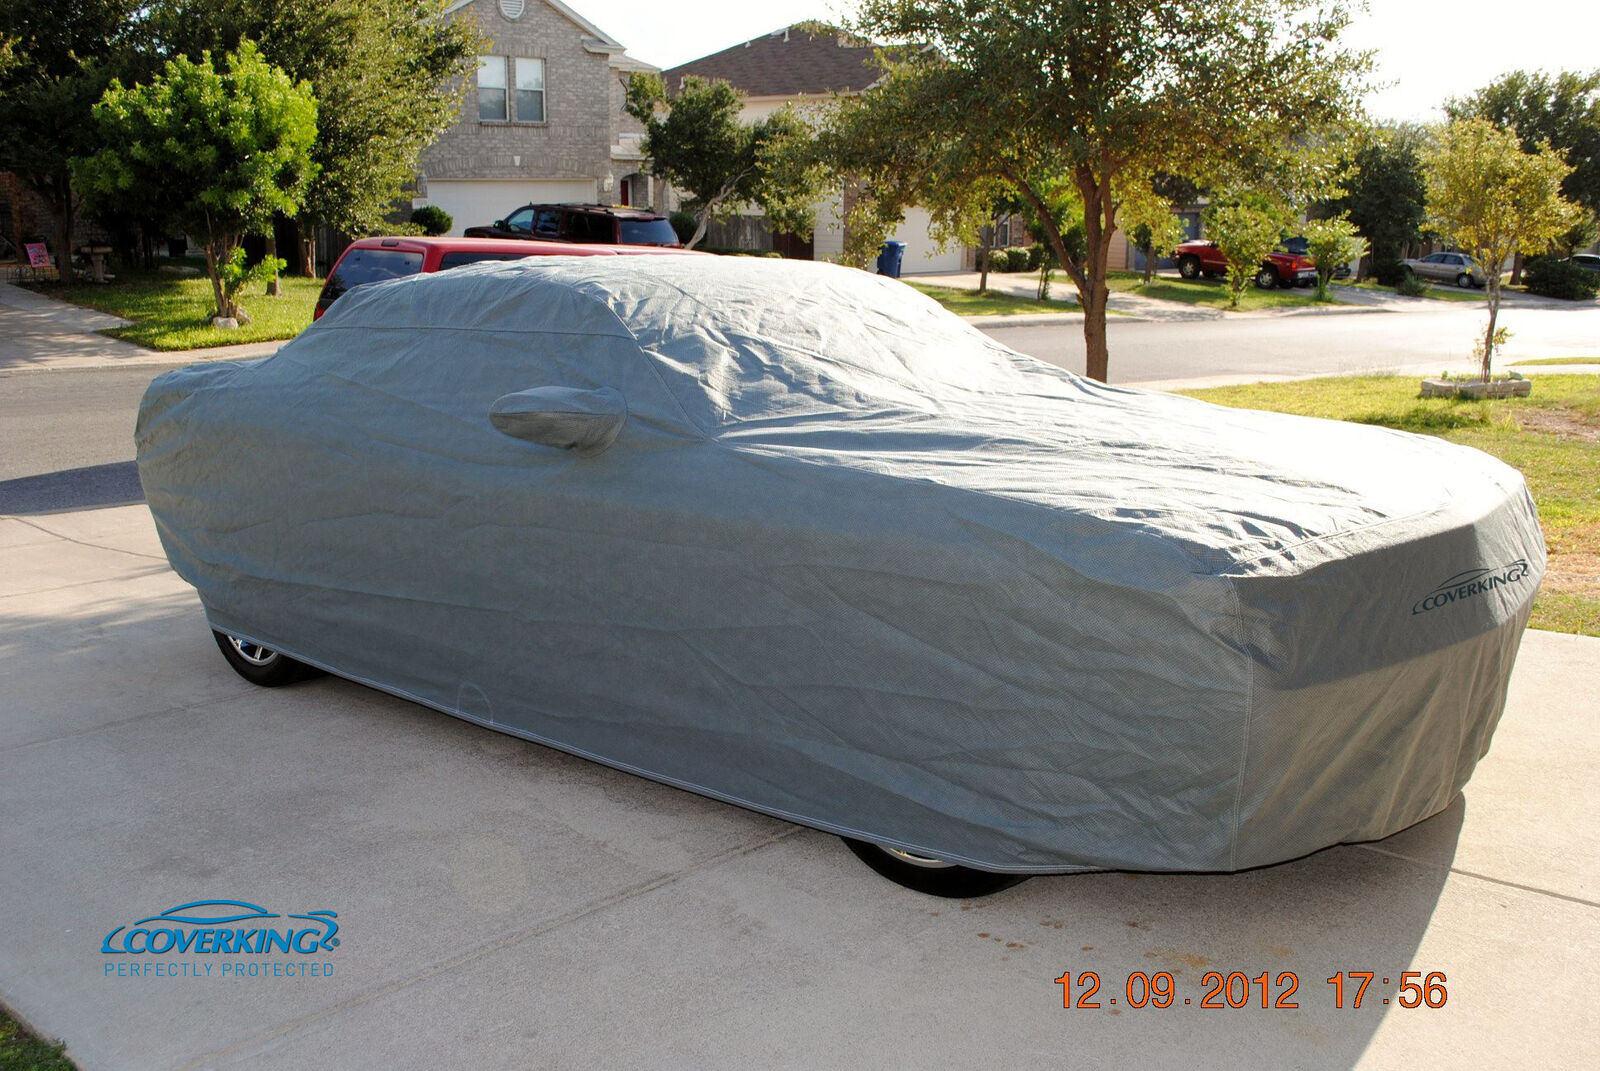 Coverking Mosom Plus Custom Tailored Car Cover for Dodge Challenger - 5 Layers